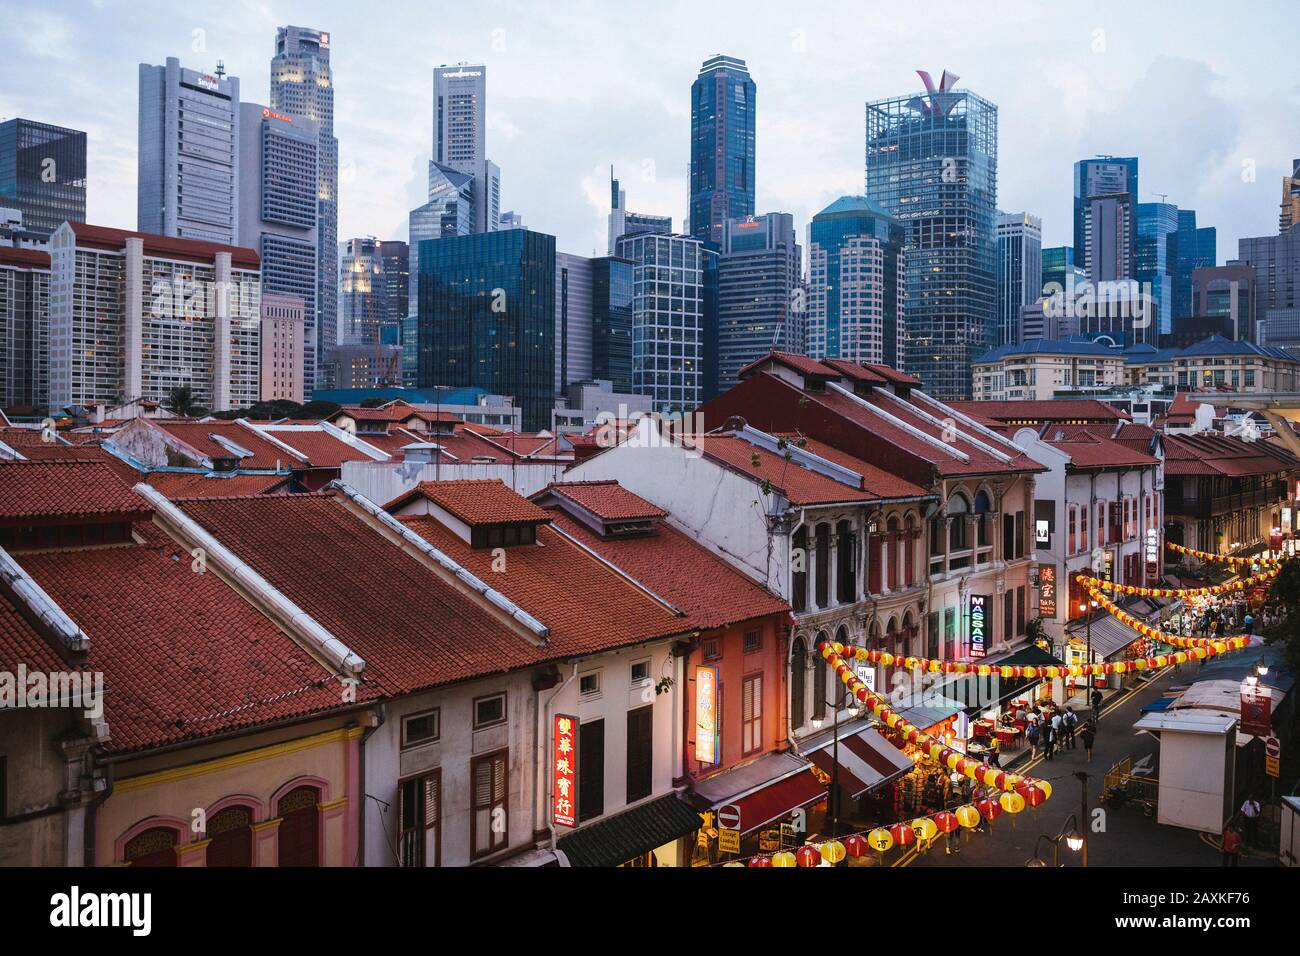 High angle view of old shophouses of Chinatown and the modern skyscrapers of Singapore at dusk. Stock Photo